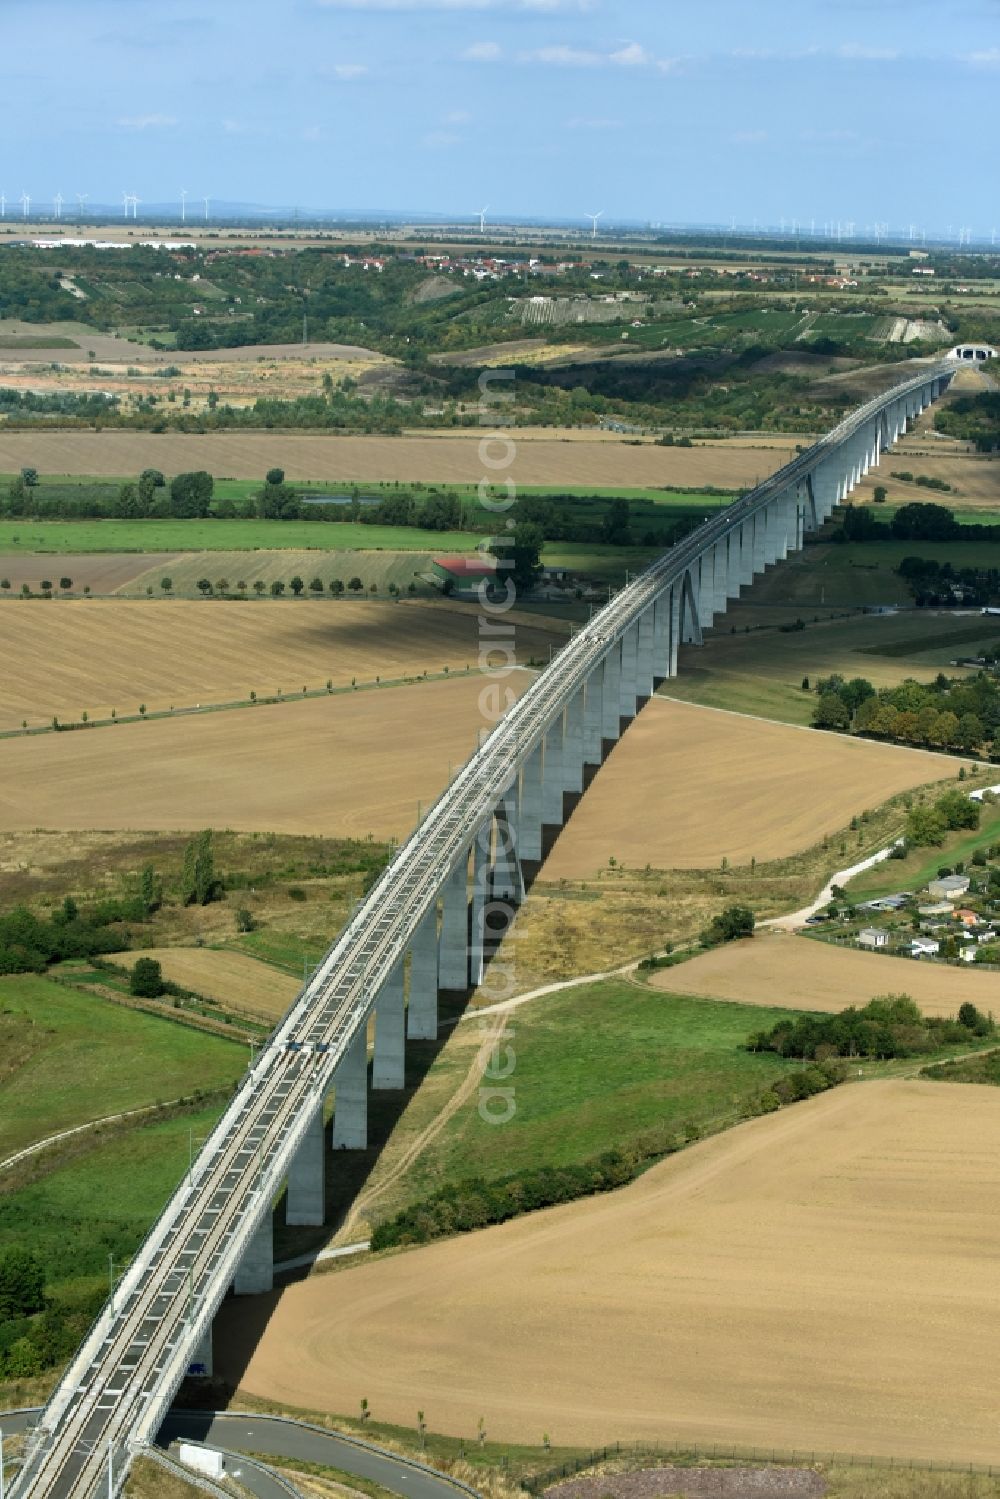 Aerial photograph Karsdorf - Unstruttal bridge in Karsdorf in Saxony Anhalt. The concrete viaduct is an integral prestressed concrete box girder bridge with continuous beams and arches of the ICE - Rail Line project VDE 8 Deutsche Bahn. Building contractors companies were the ARGE Alpine Bau Germany AG with Berger Bau GmbH after drafts of DB ProjektBau GmbH, Structural Engineering and Schlaich, Berger und Partner and cancer + KIEFER GmbH